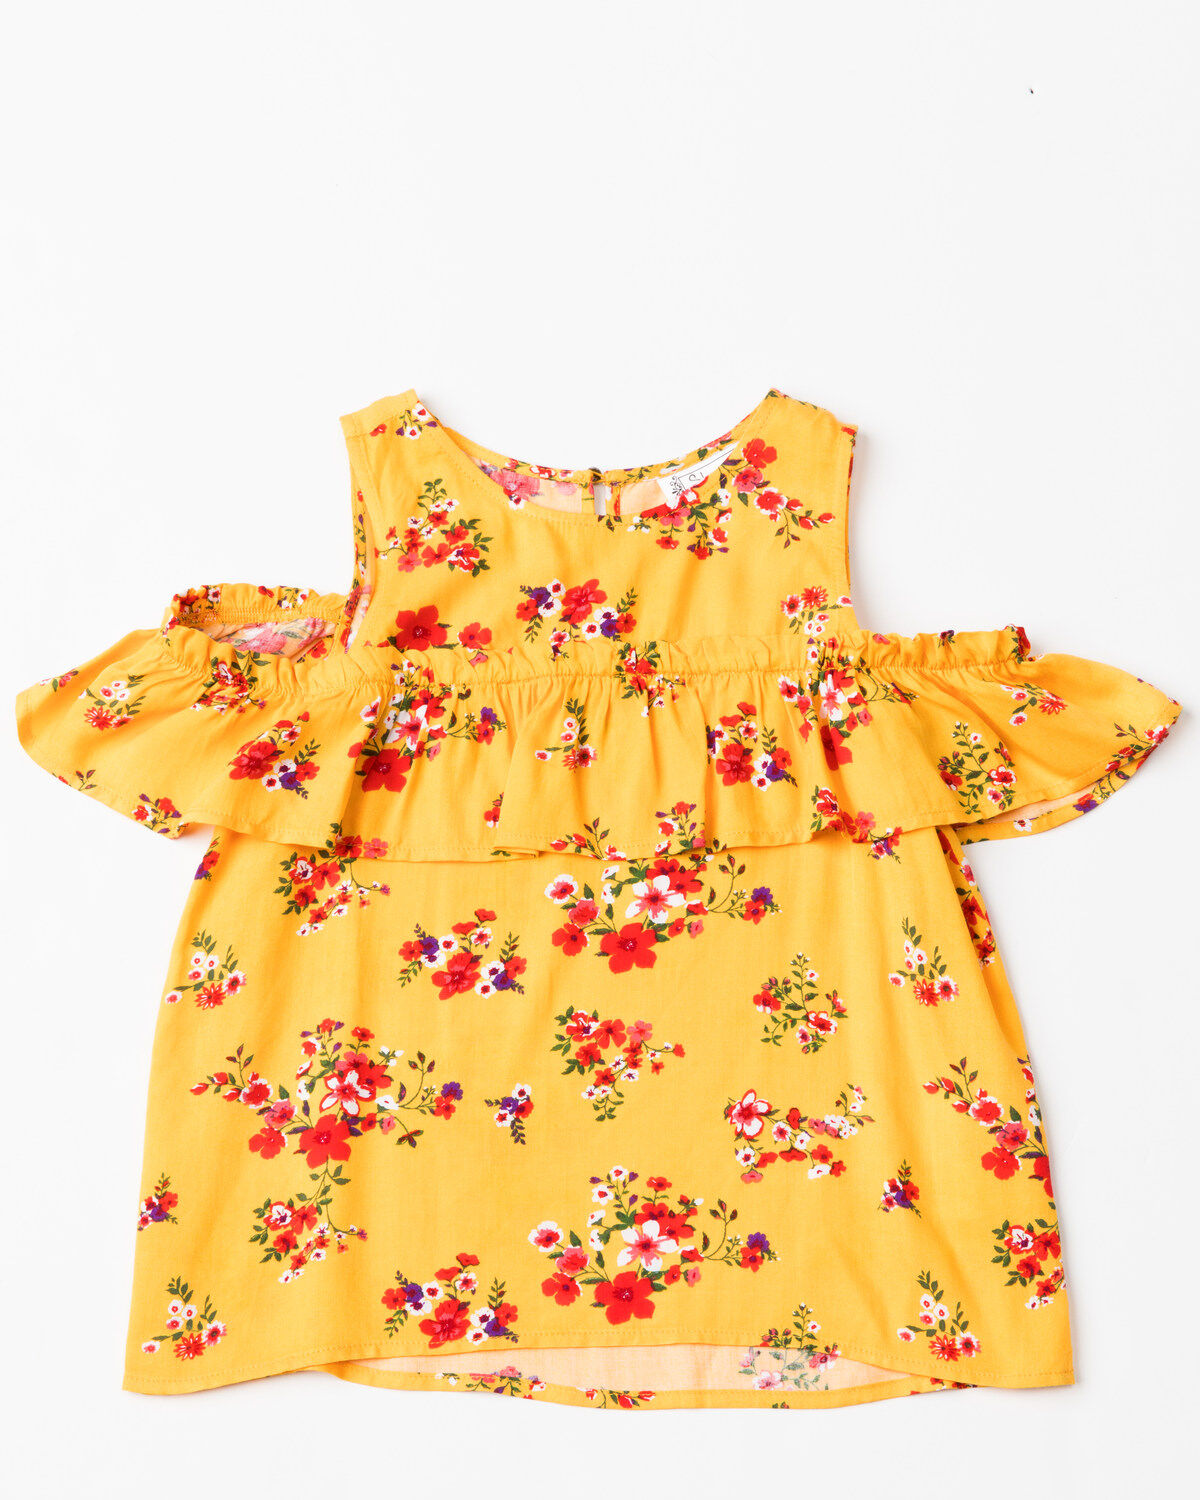 western dresses for 7 year girl